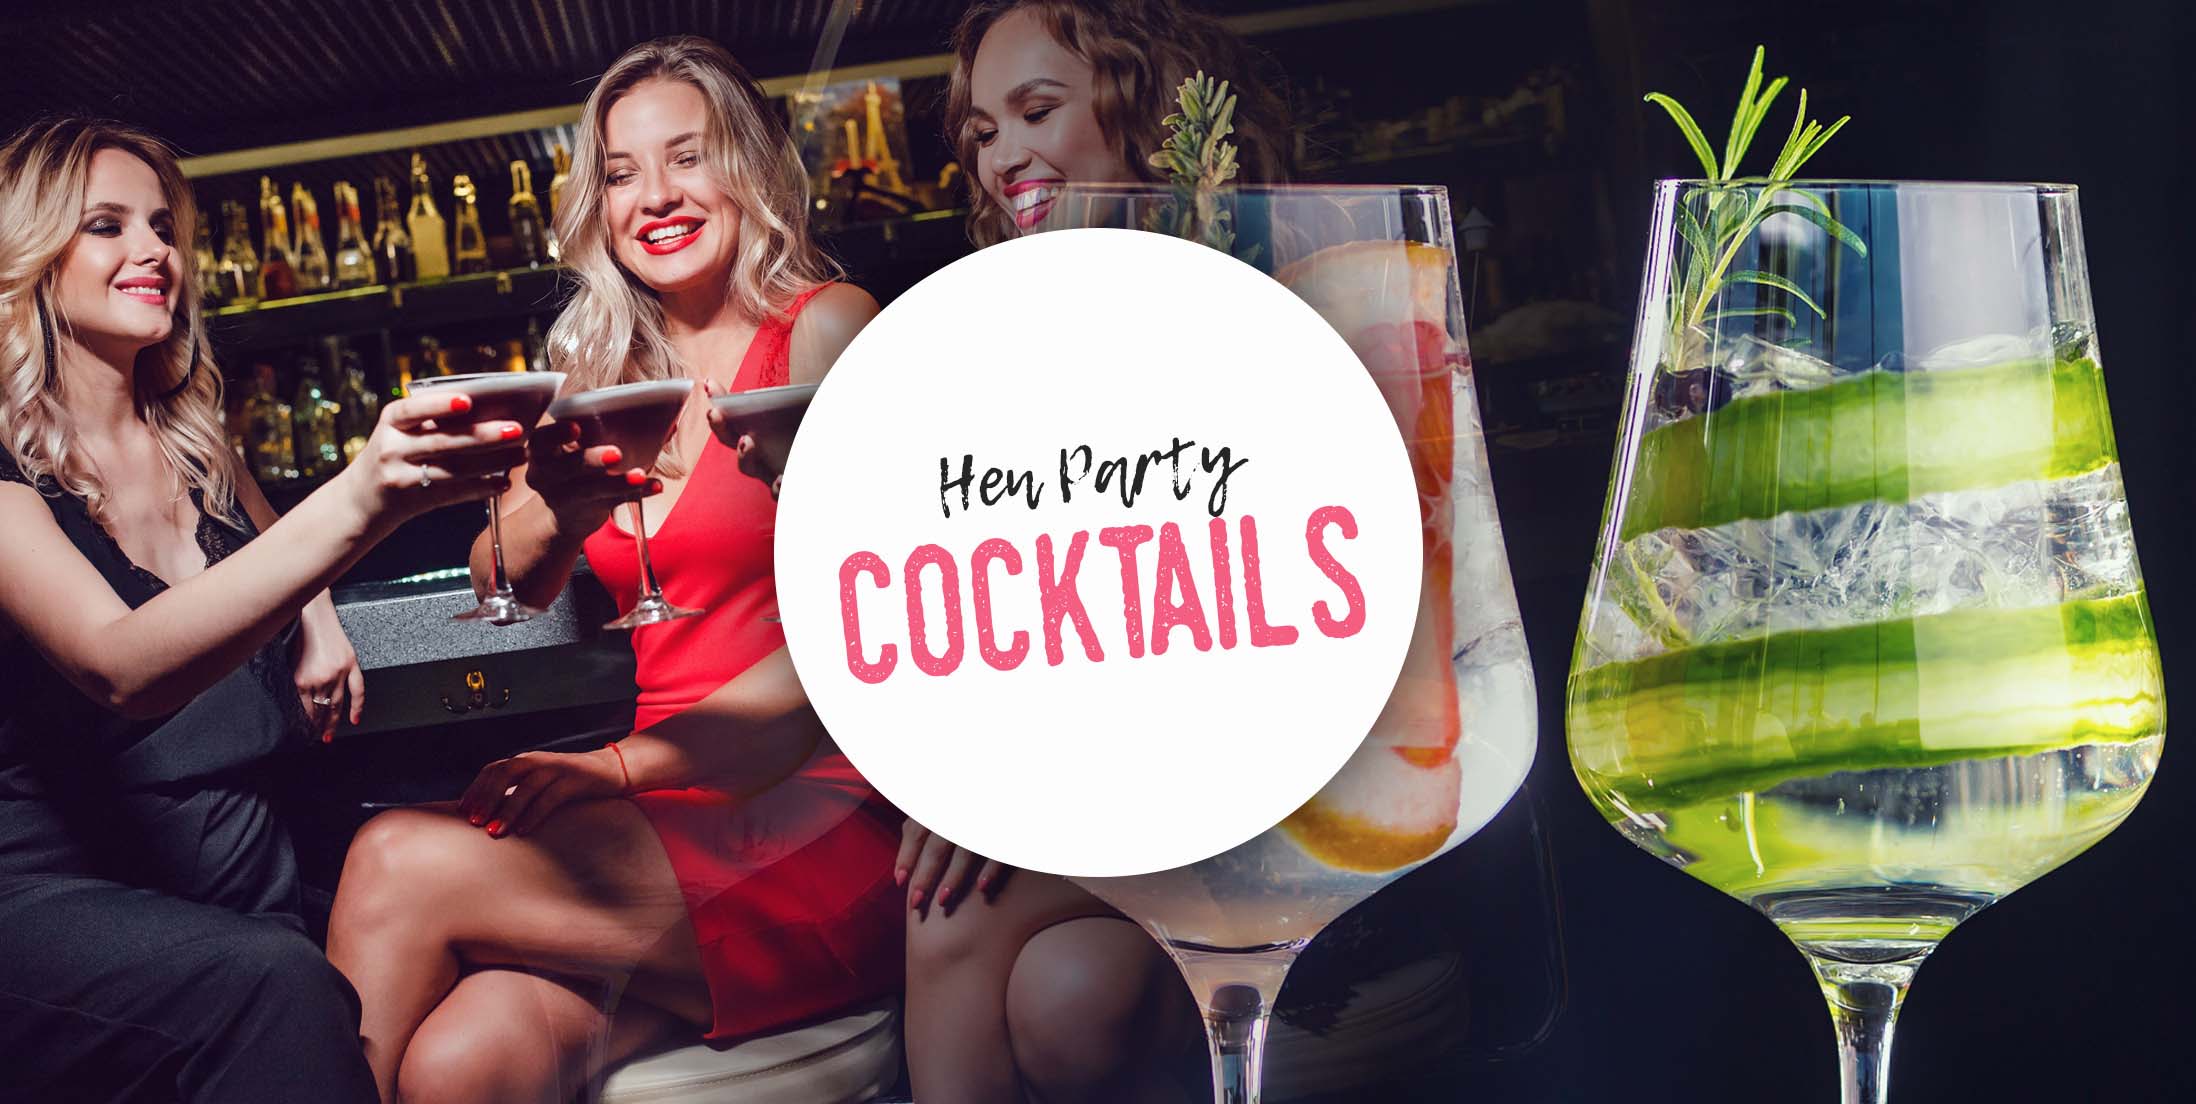 https://www.funktionevents.co.uk/images/pictures/new/6-blog/2018/hen-party-cocktails-banner-(content-max-breakpoint-width).jpg?v=3b9ad3f0&mode=h